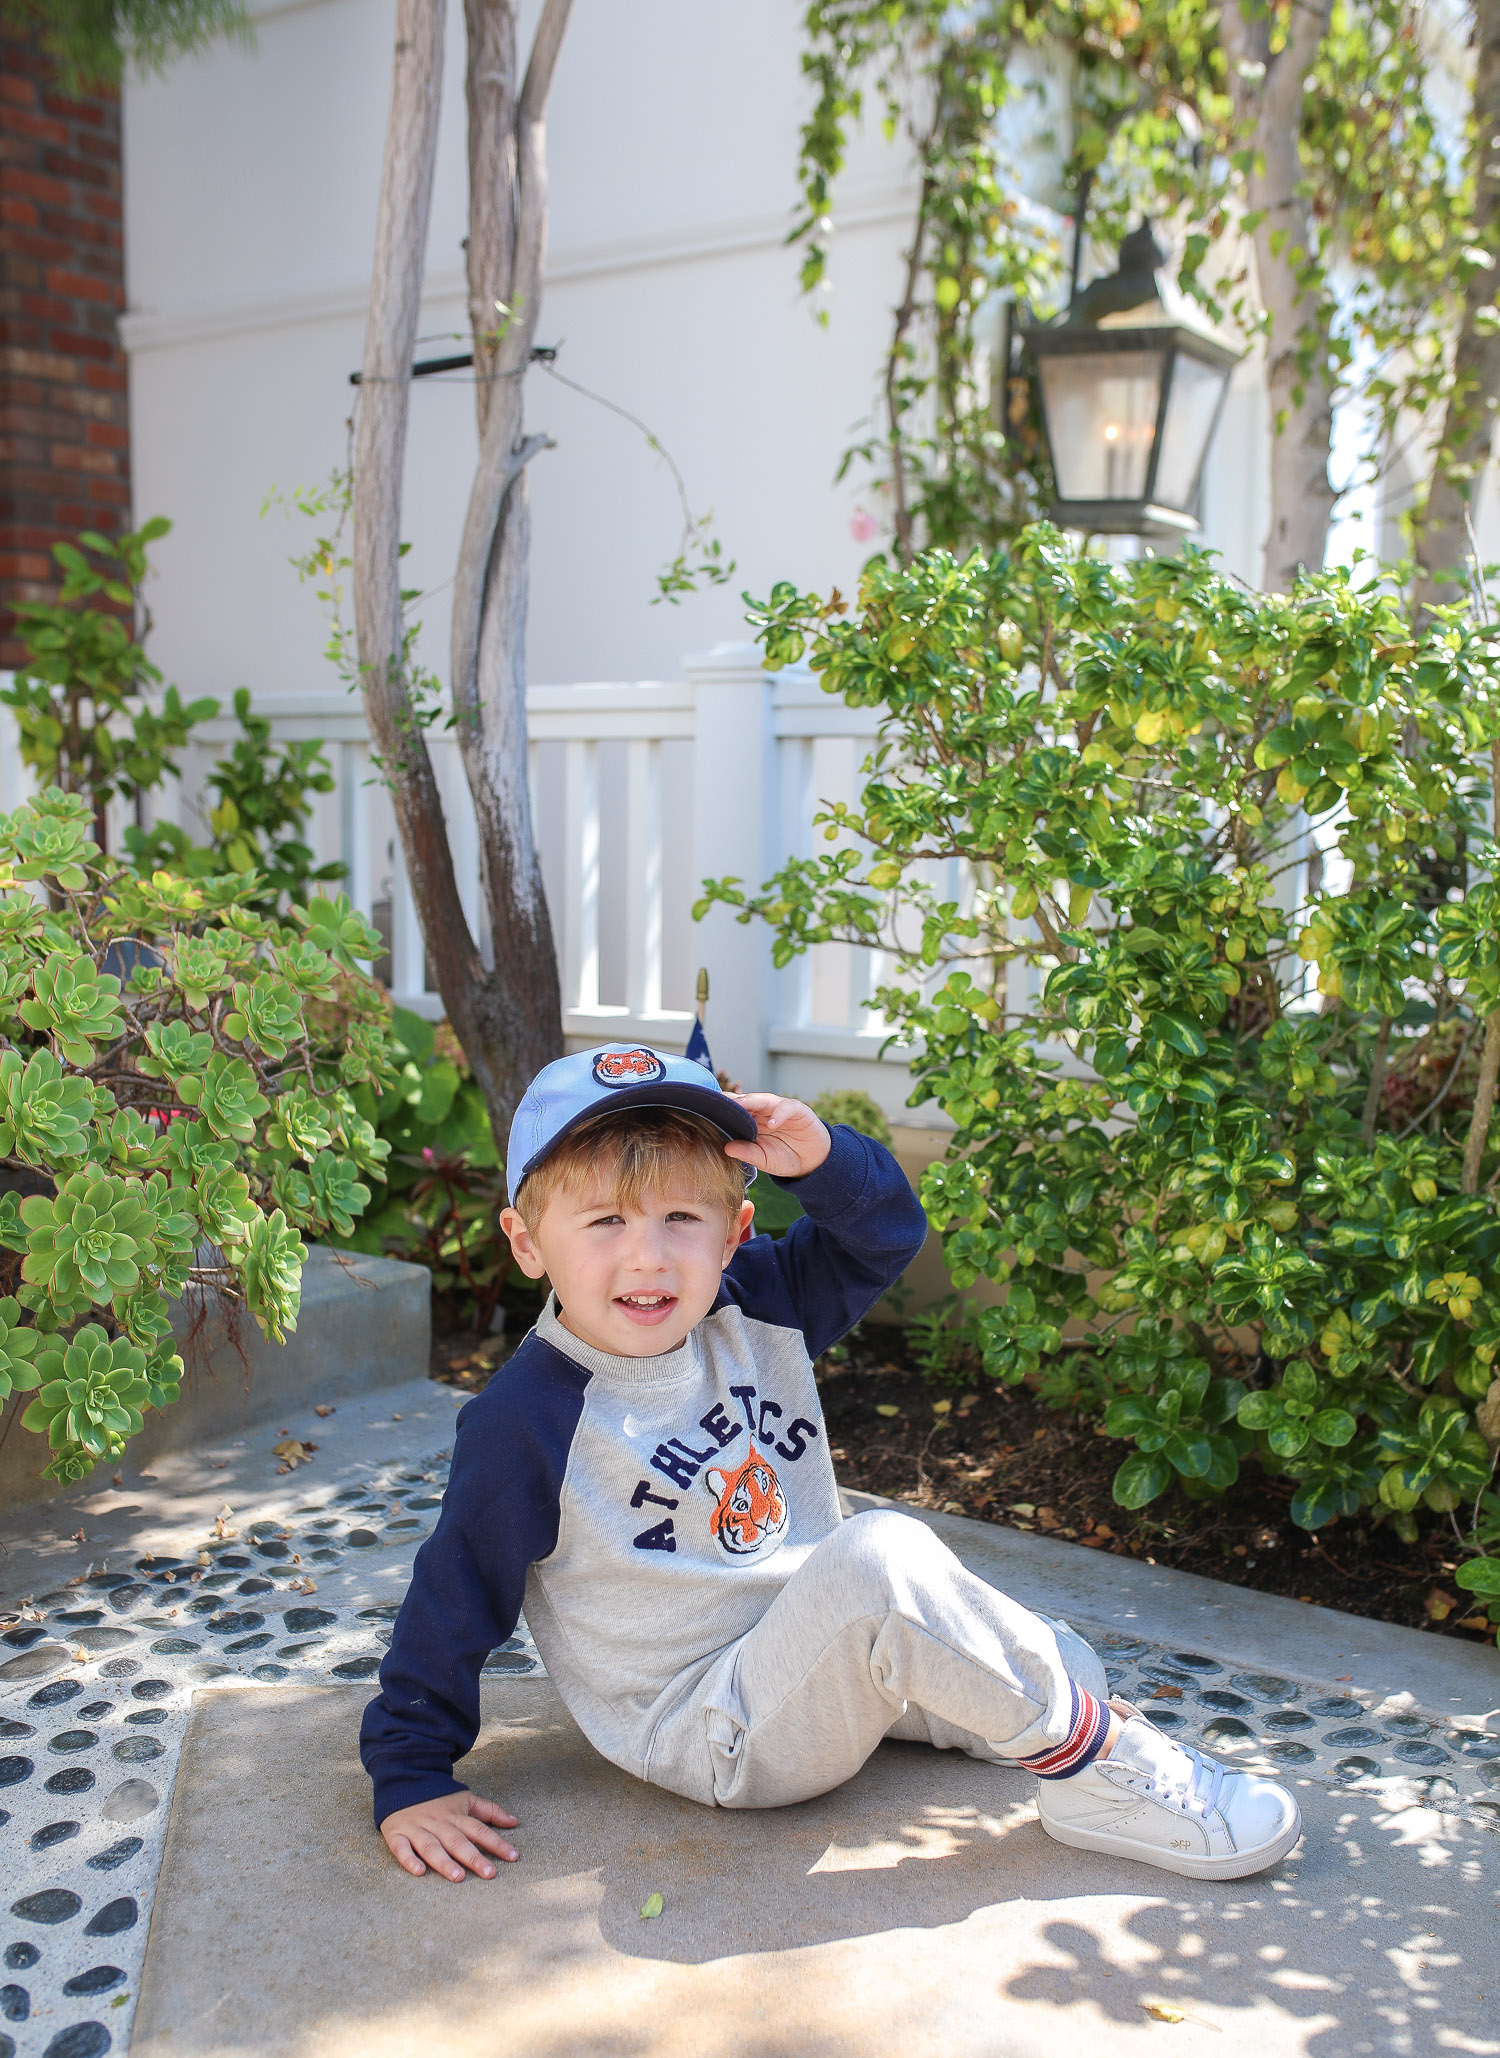 Janie and Jack by popular US fashion Blog, The Sweetest Thing: image of a young boy sitting outside on the ground in Newport Beach, CA and wearing a Janie and Jack TIGER PATCH CAP, Janie and Jack RAGLAN TIGER SWEATSHIRT, Janie and Jack STRIPE TRIM JOGGER.